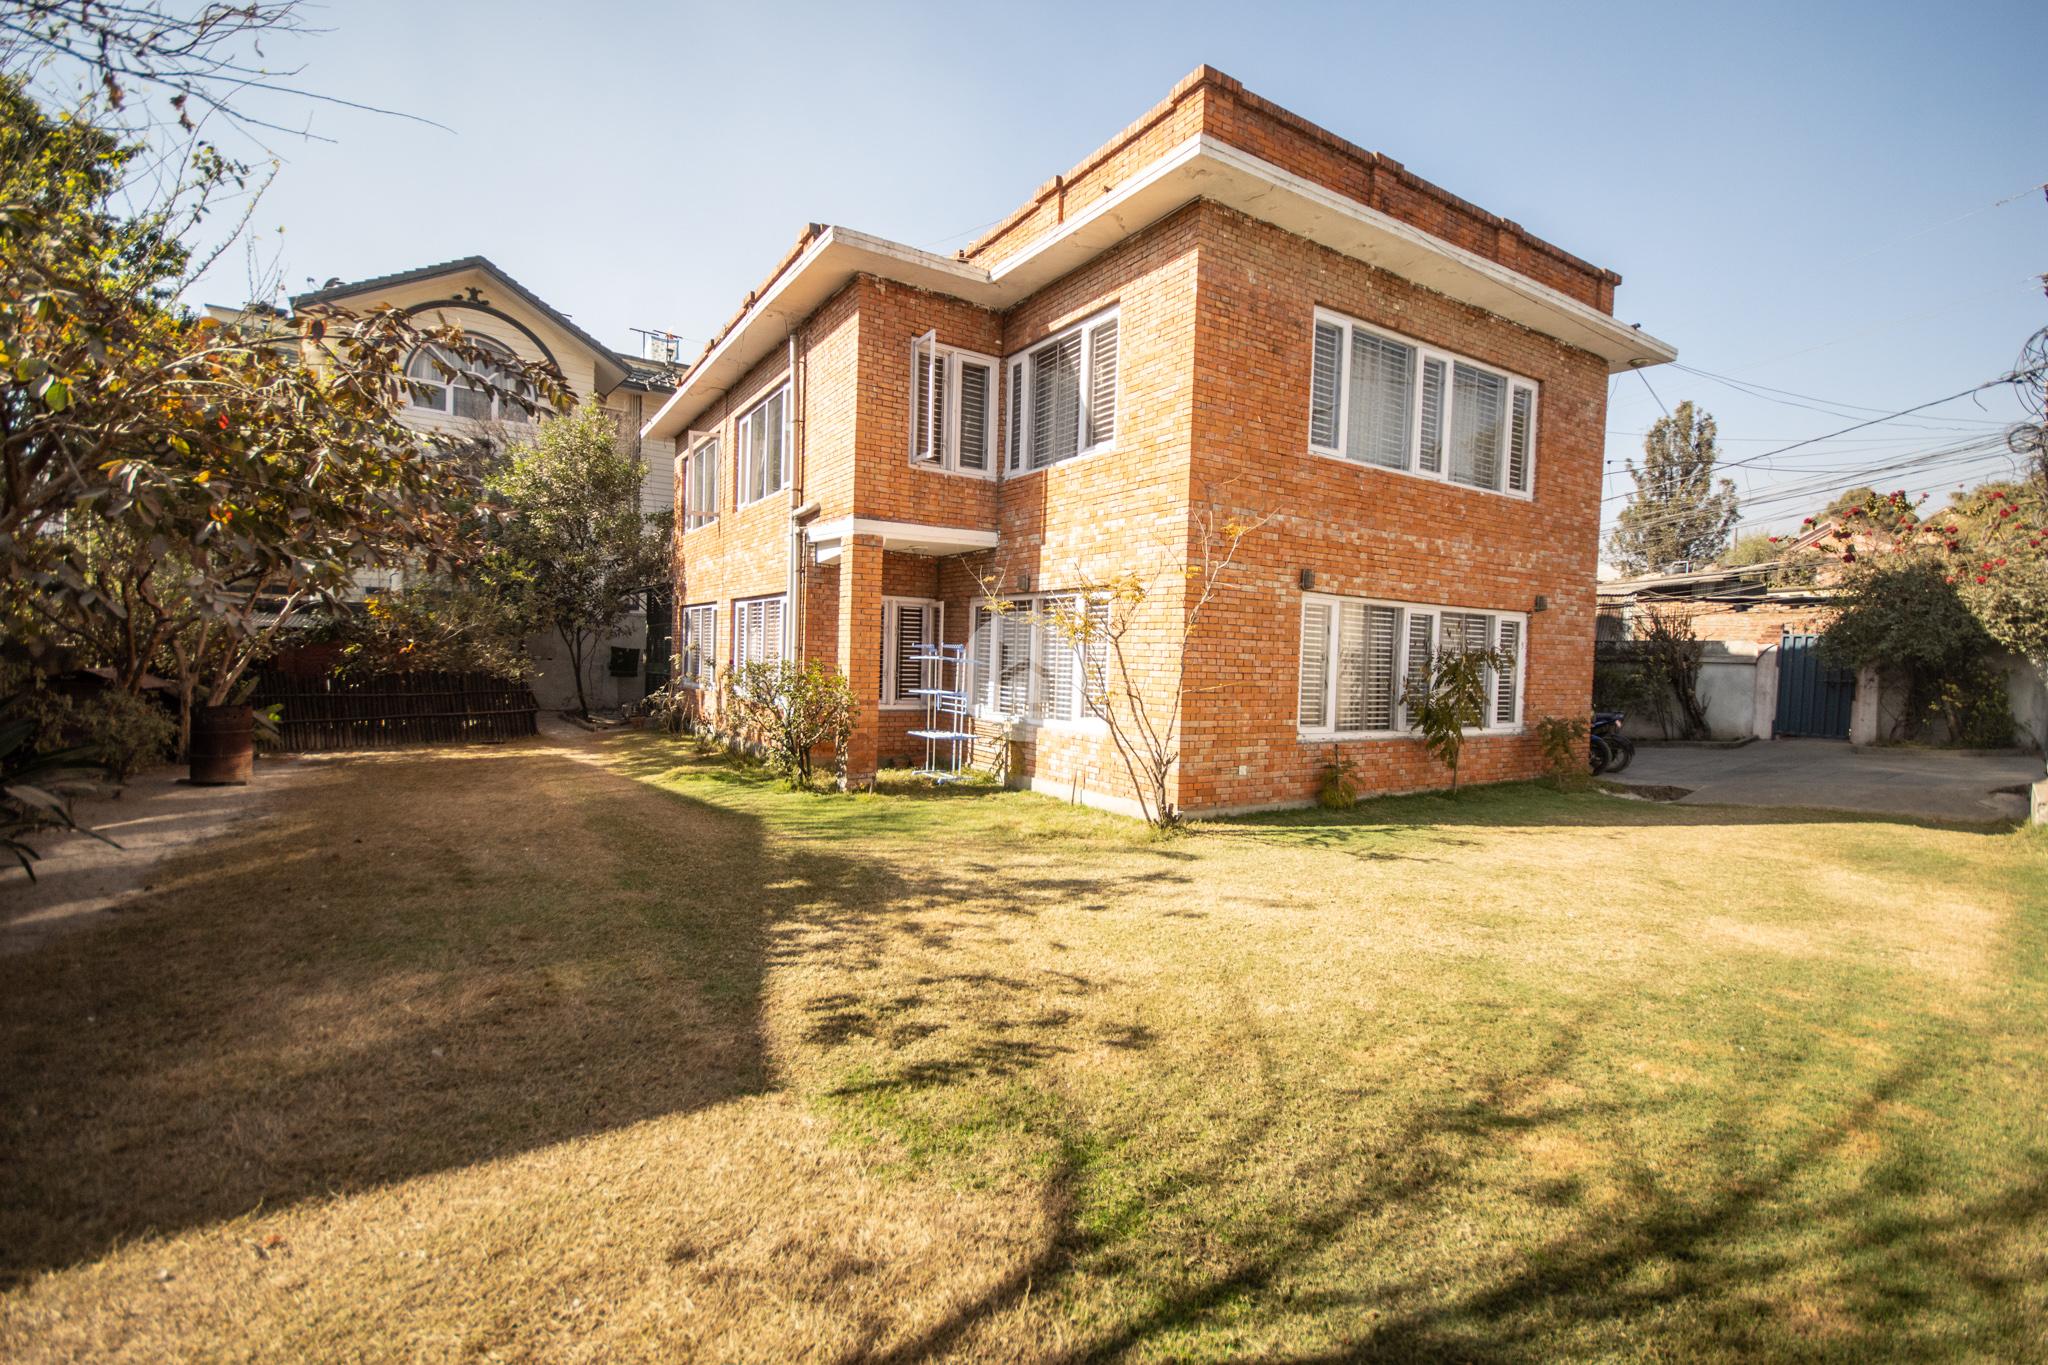 Attractive House is for Sale : House for Sale in Baluwatar, Kathmandu Image 6